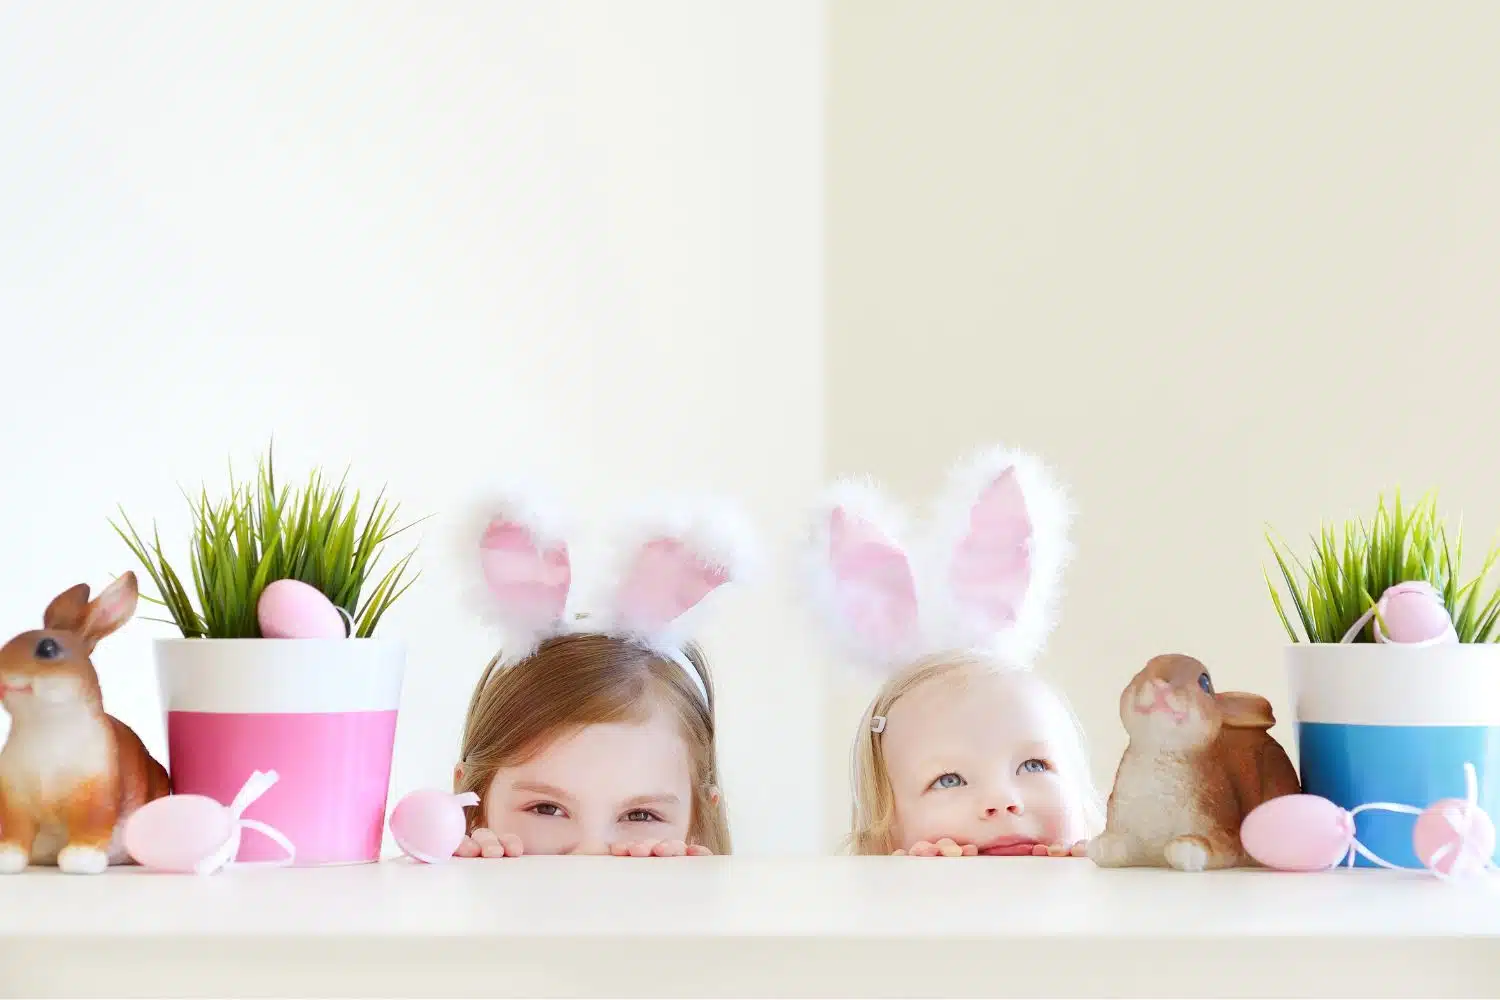 Egg-cellent Family Fun Easter Activities for Kids